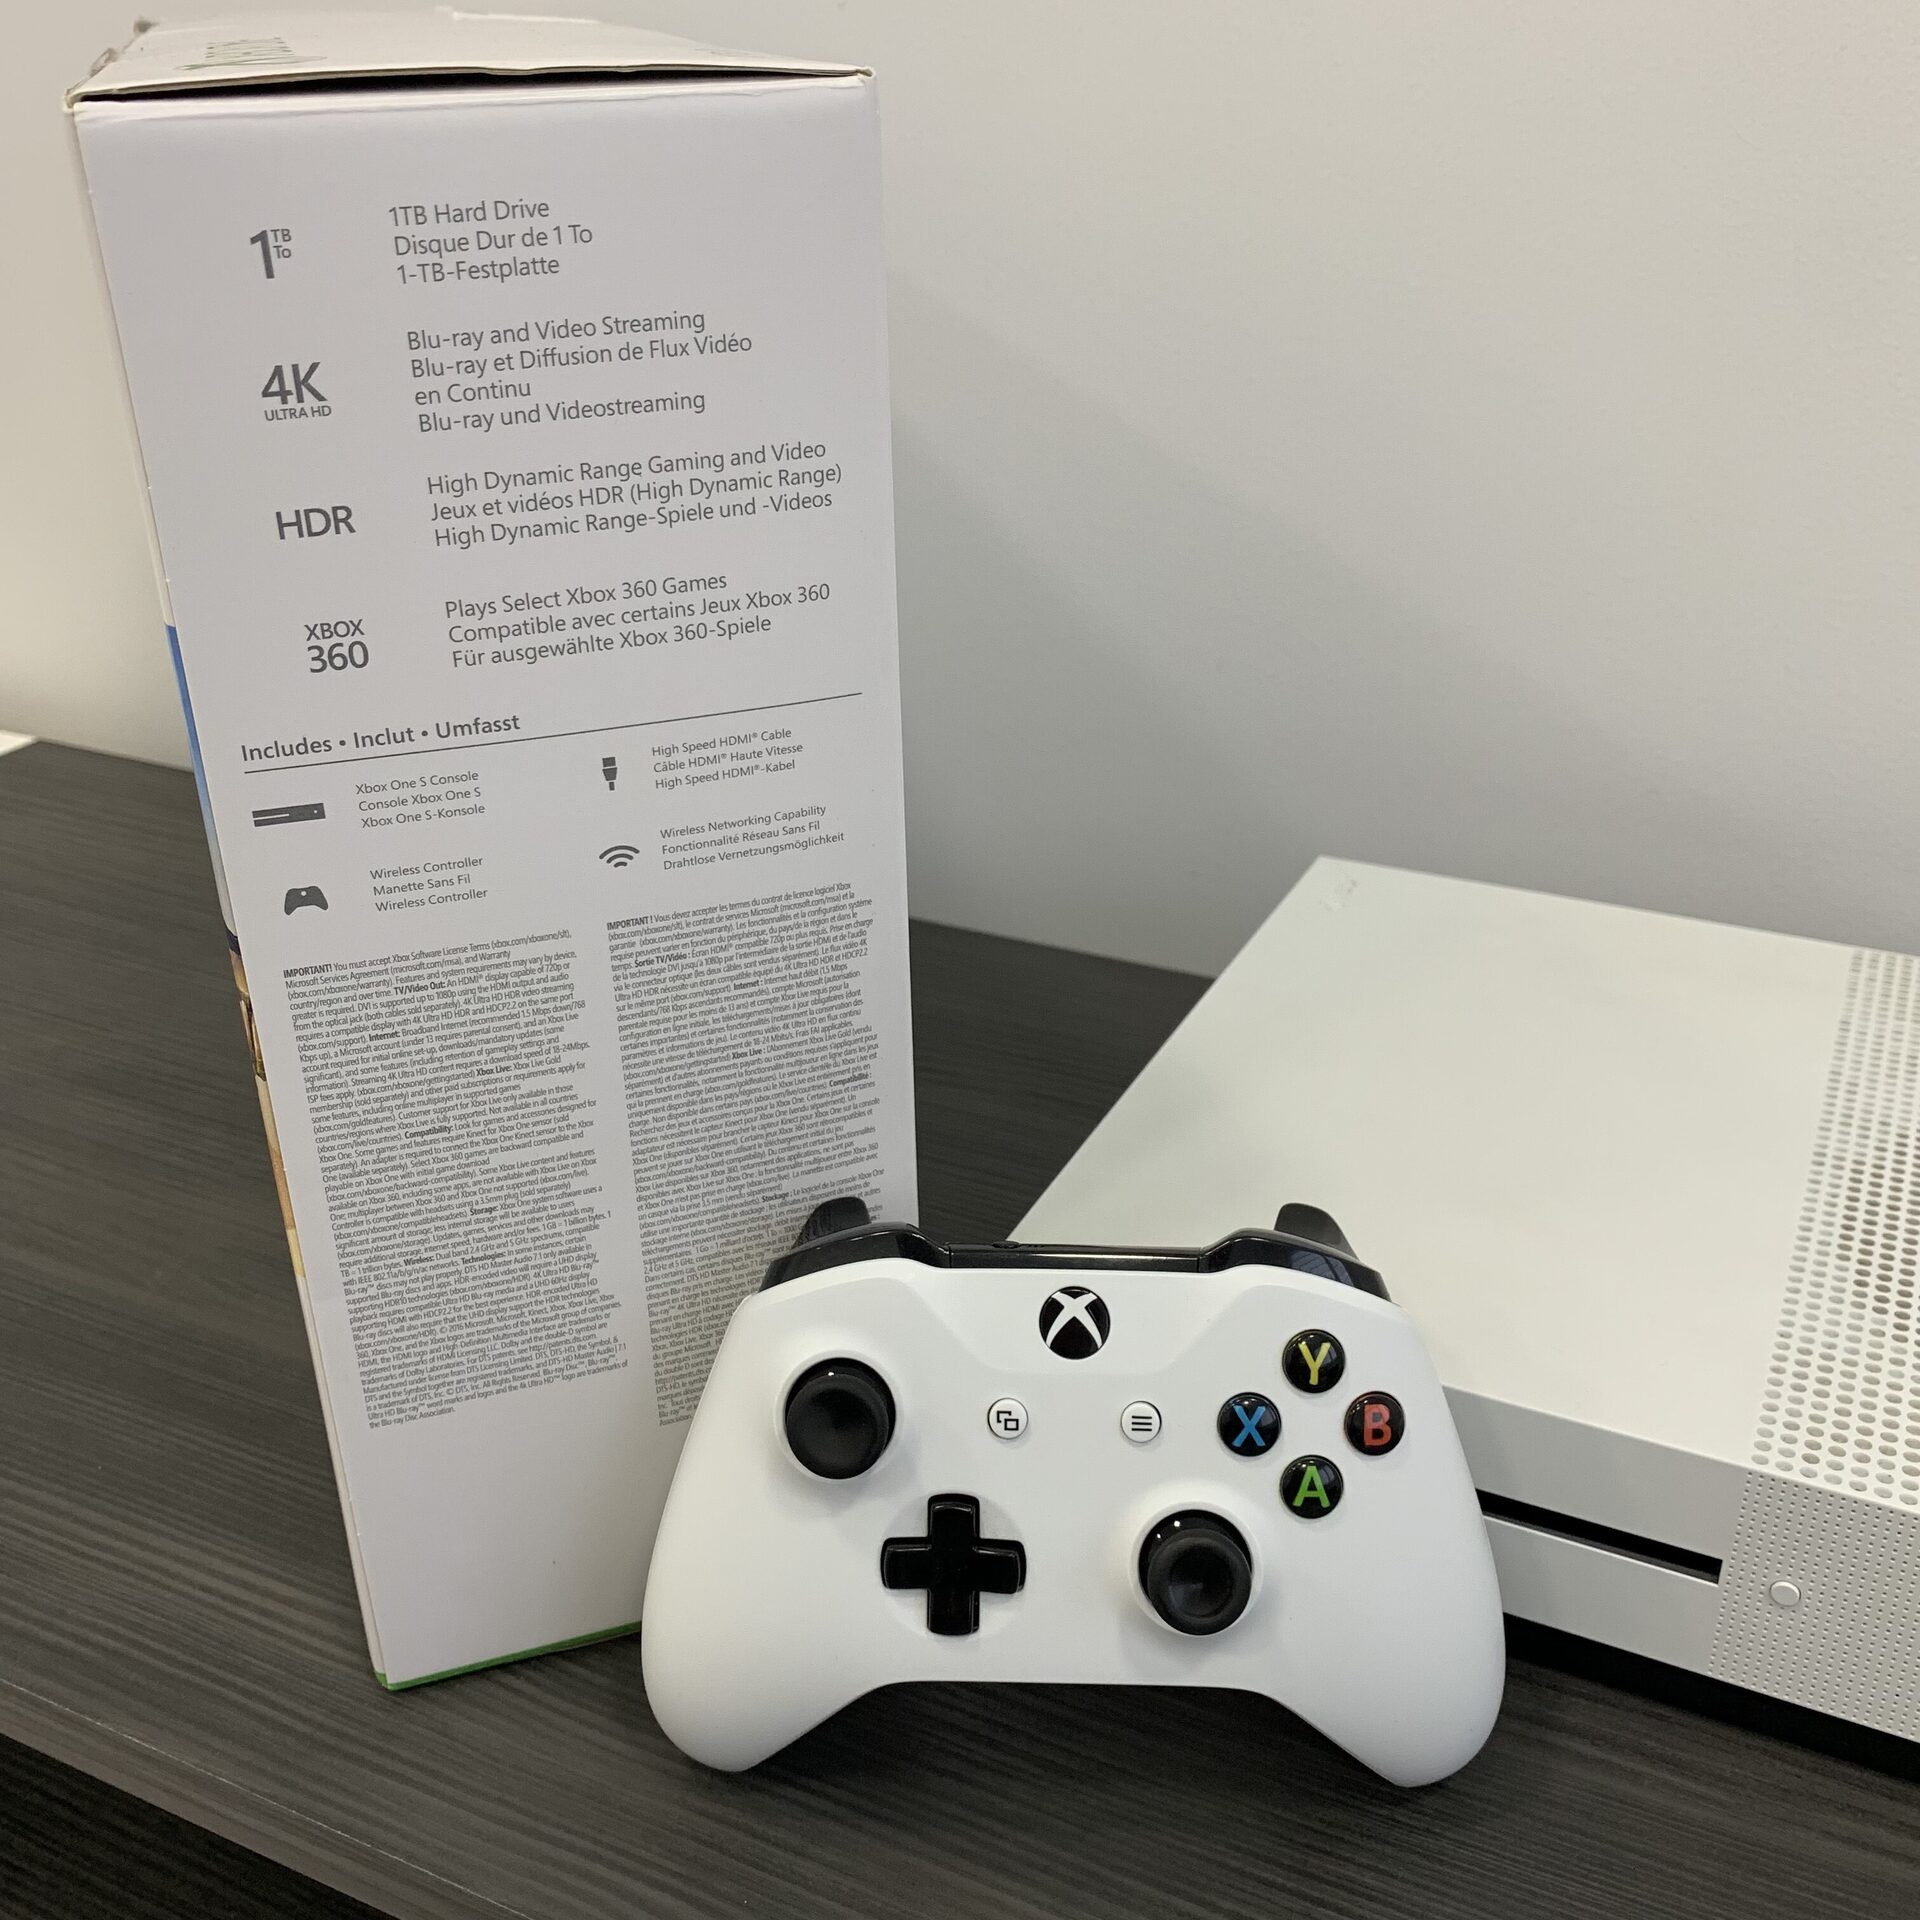 Xbox One S 1TB Roblox Console Bundle - White Xbox One S Console &  Controller - Full download of Roblox included - 4K Ultra HD Blu-ray video  streaming